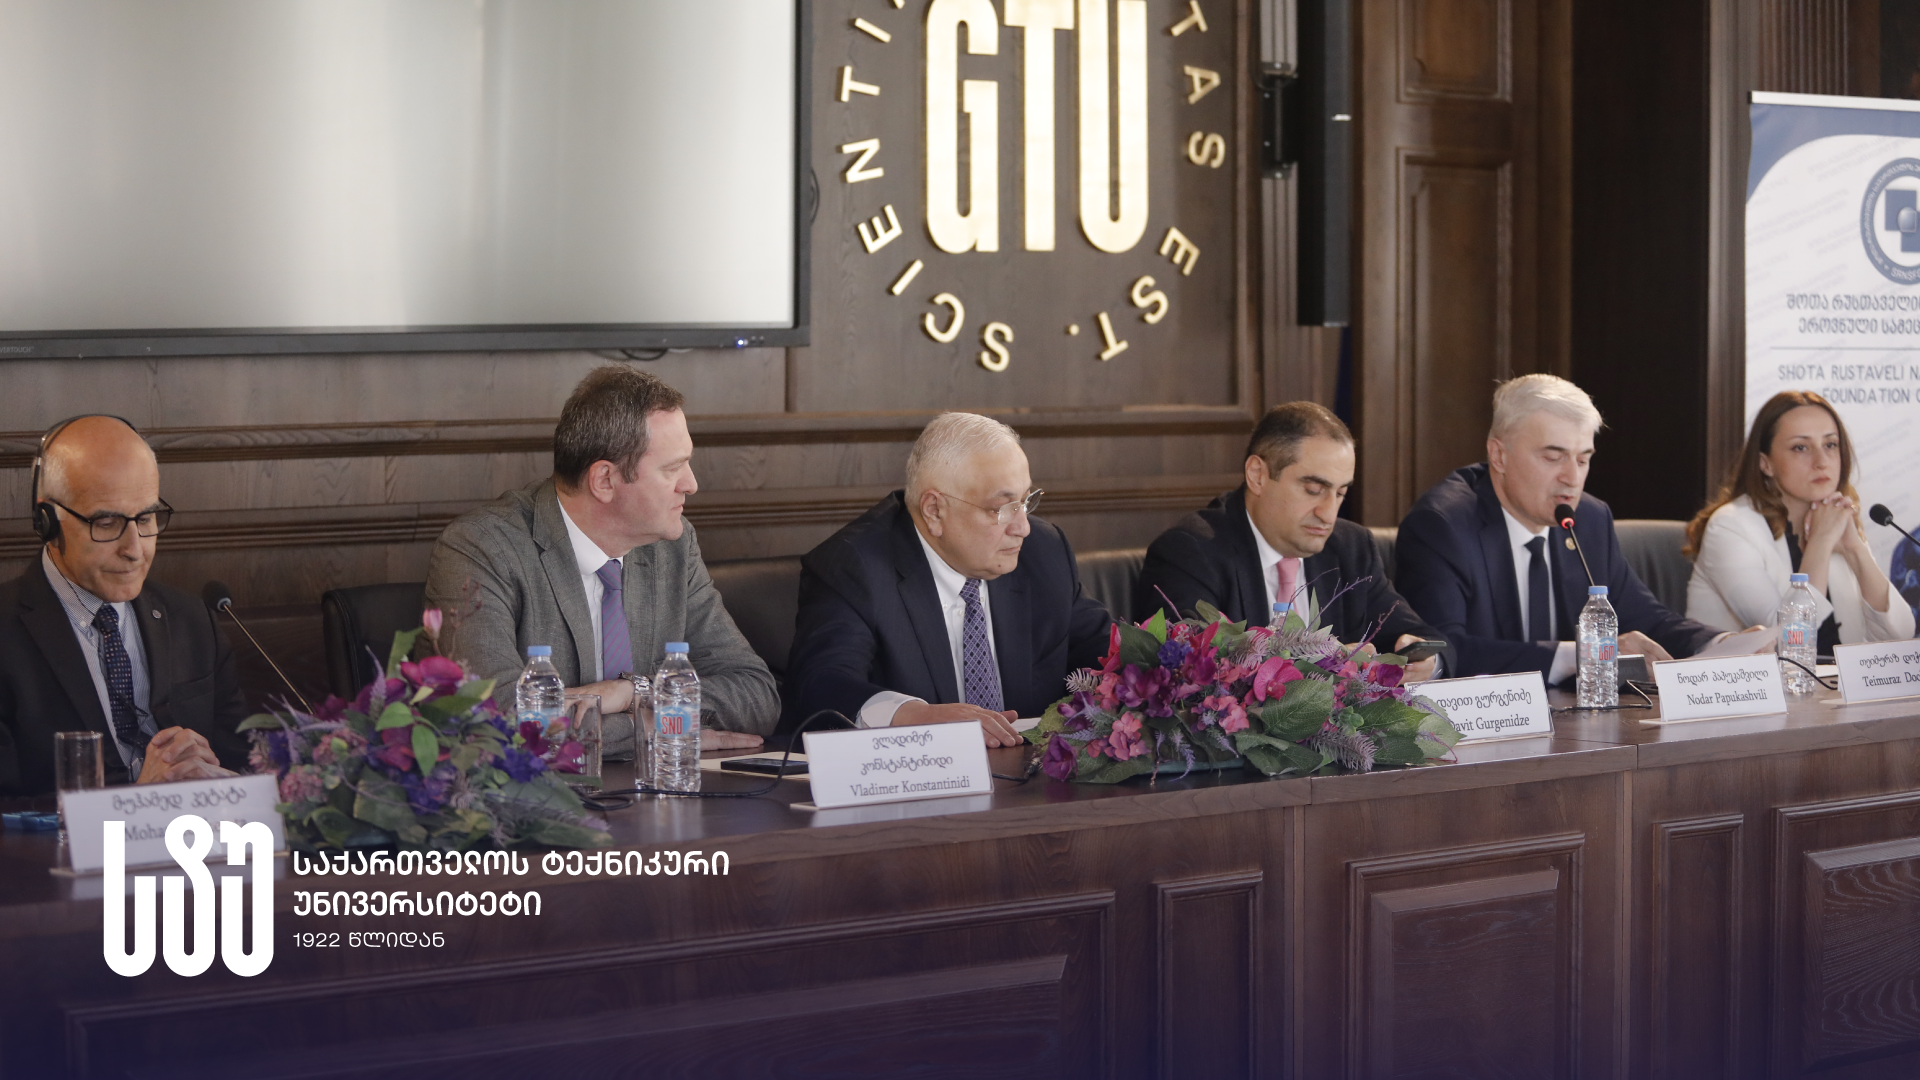 The forum “Scientific Diplomacy for Peace and Development” was opened at GTU